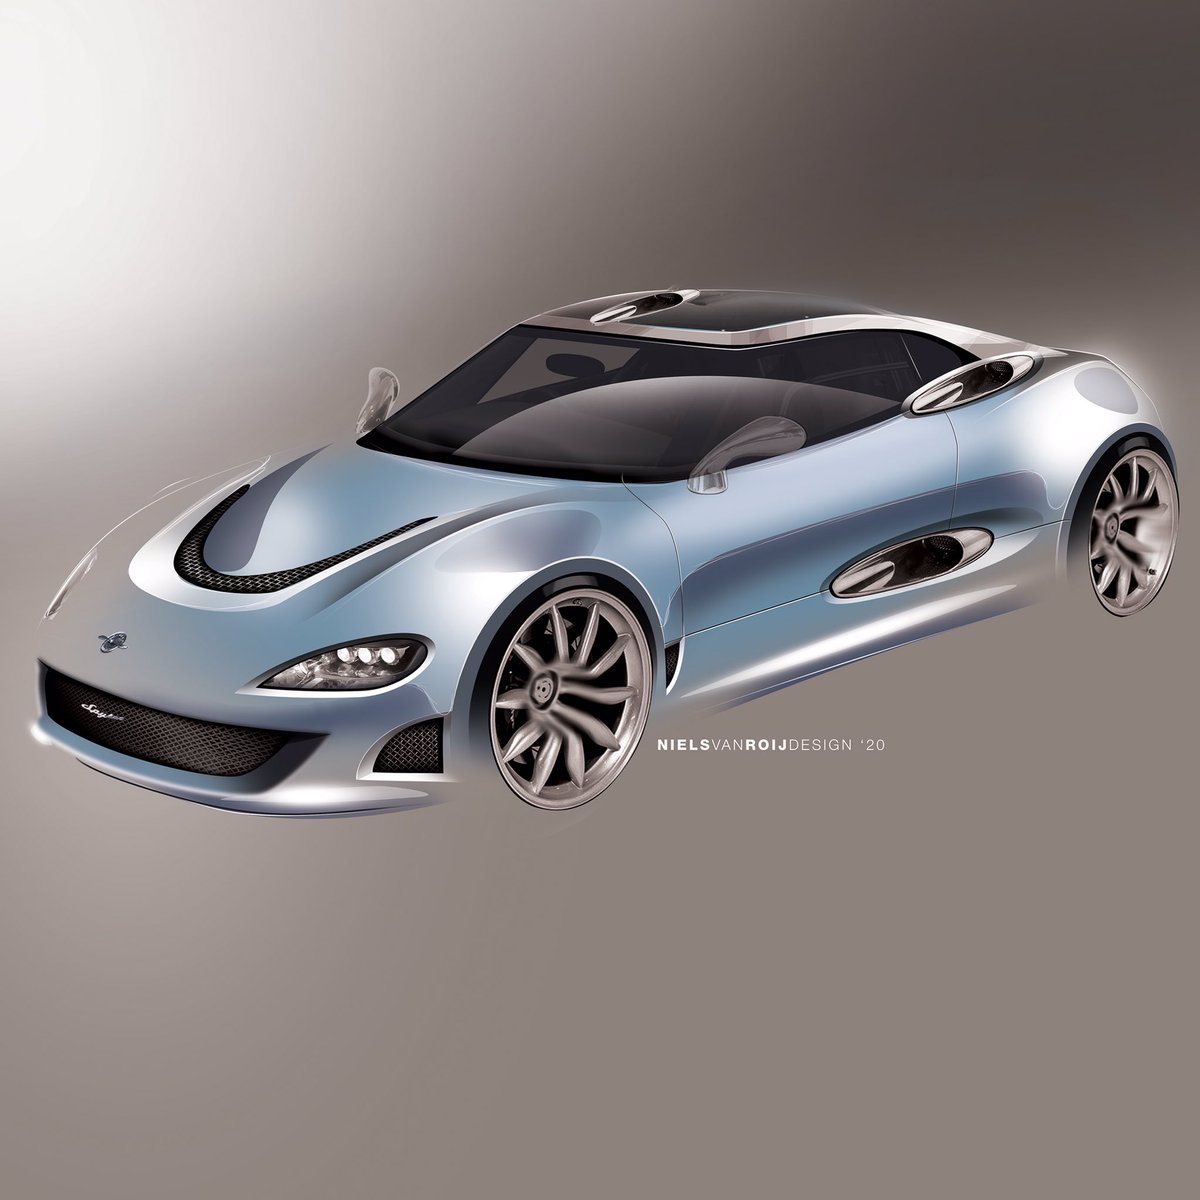 #SpykerCars

What if... a #Spyker C8 would be rebodied into a #coachbuilt, one-off unique piece of kinetic sculpture. How could this Dutch sports car be reinterpreted? Maybe like this!

—————

#cardesign #supercarclub #supercarlifestyle #coachbuilt #petrolhead #NielsvanRoijDesign